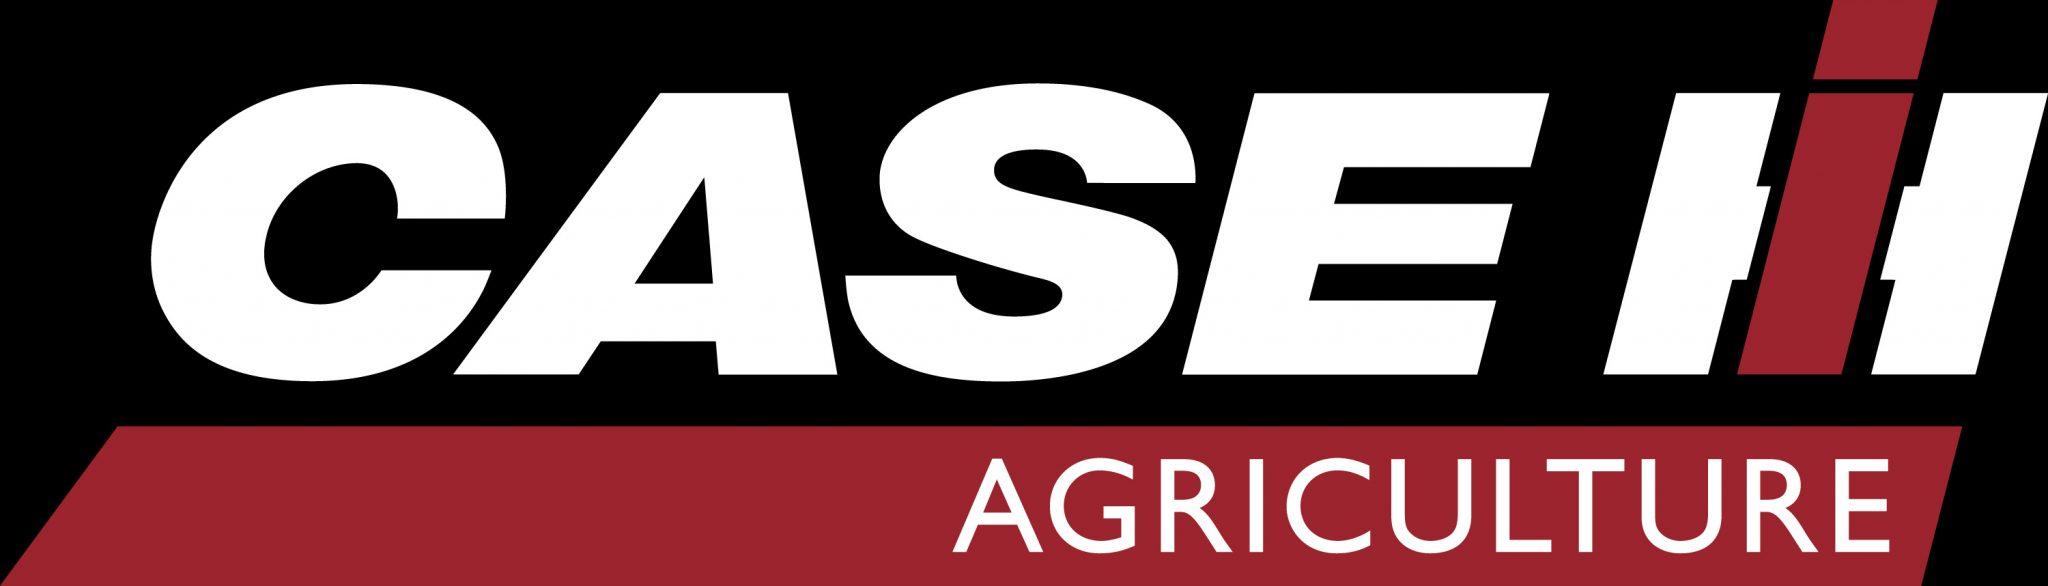 Case IH Logo - Agriculture | Hartwigs | CASE IH | Balers, Combines, Headers Fronts ...